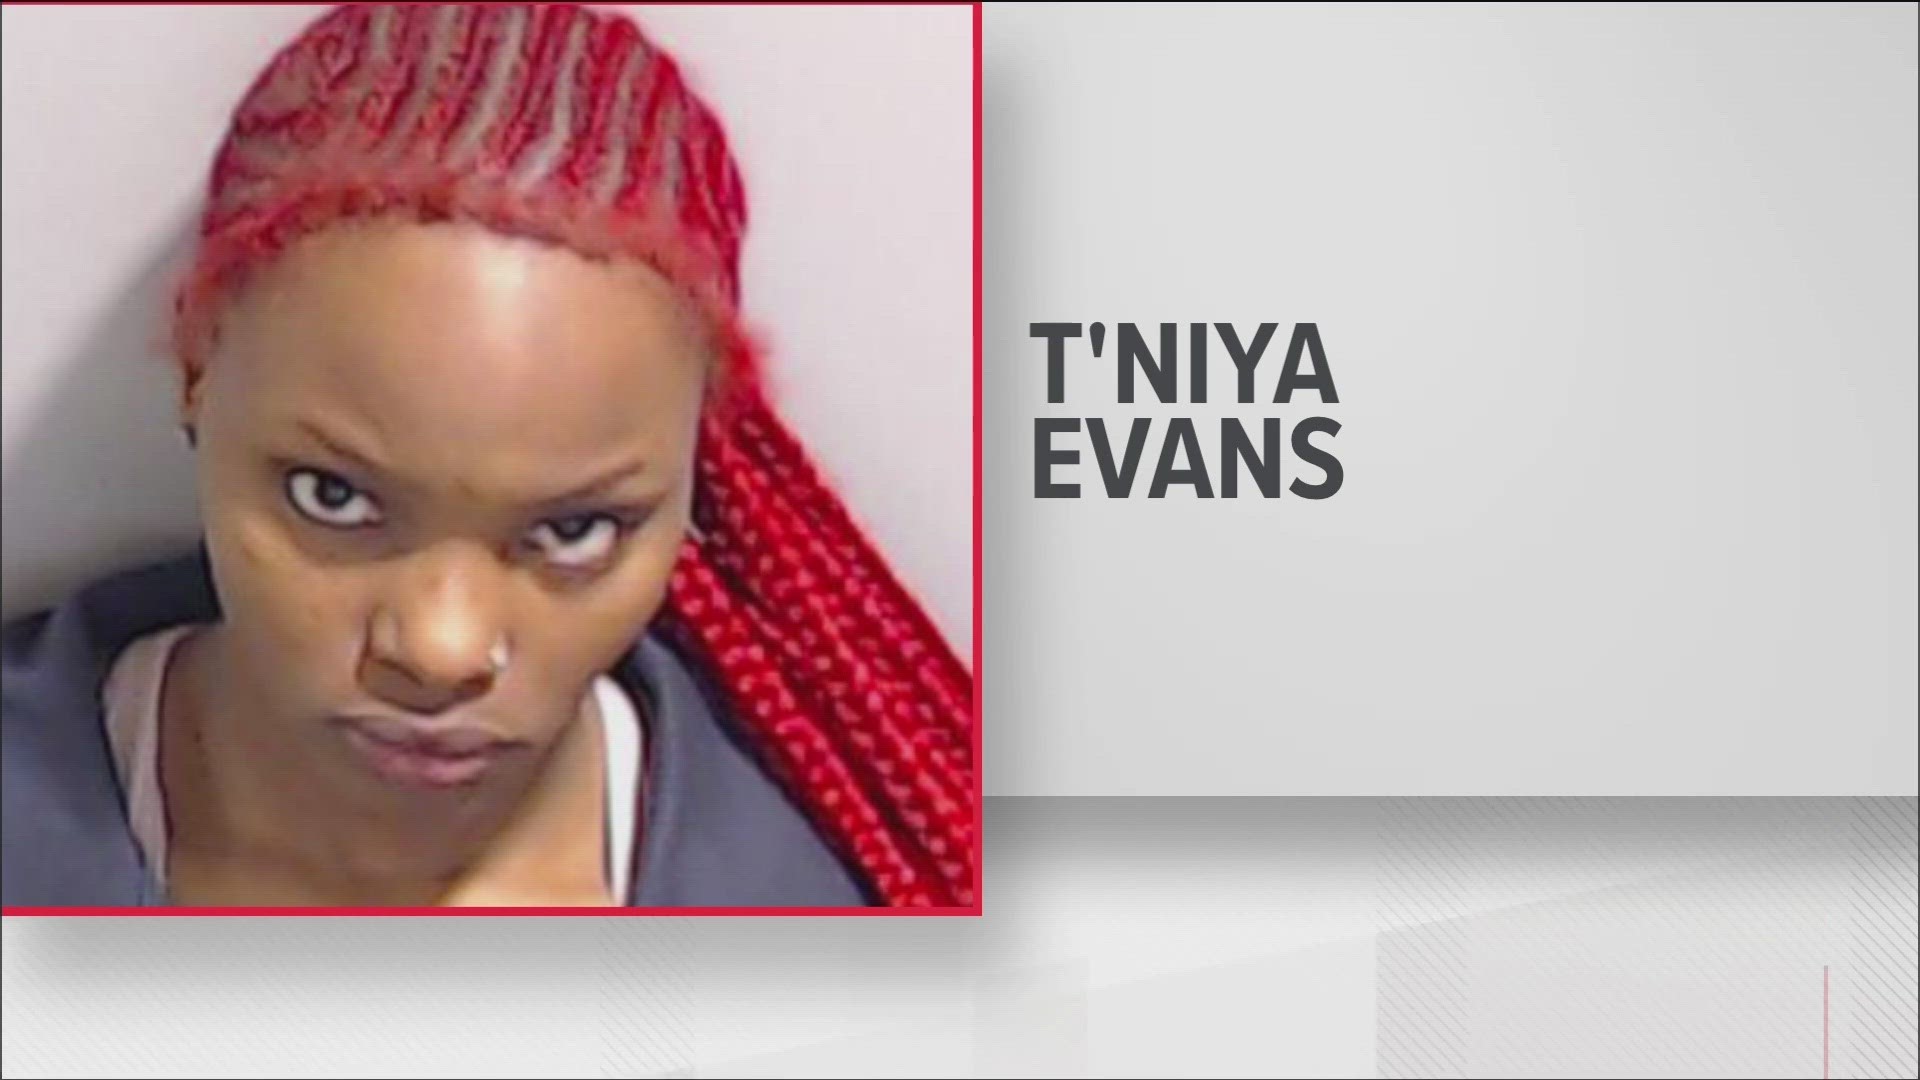 T'Niya Evans is being charged with murder, aggravated assault, possession of a firearm during the commission of a felony and theft by receiving stolen property.